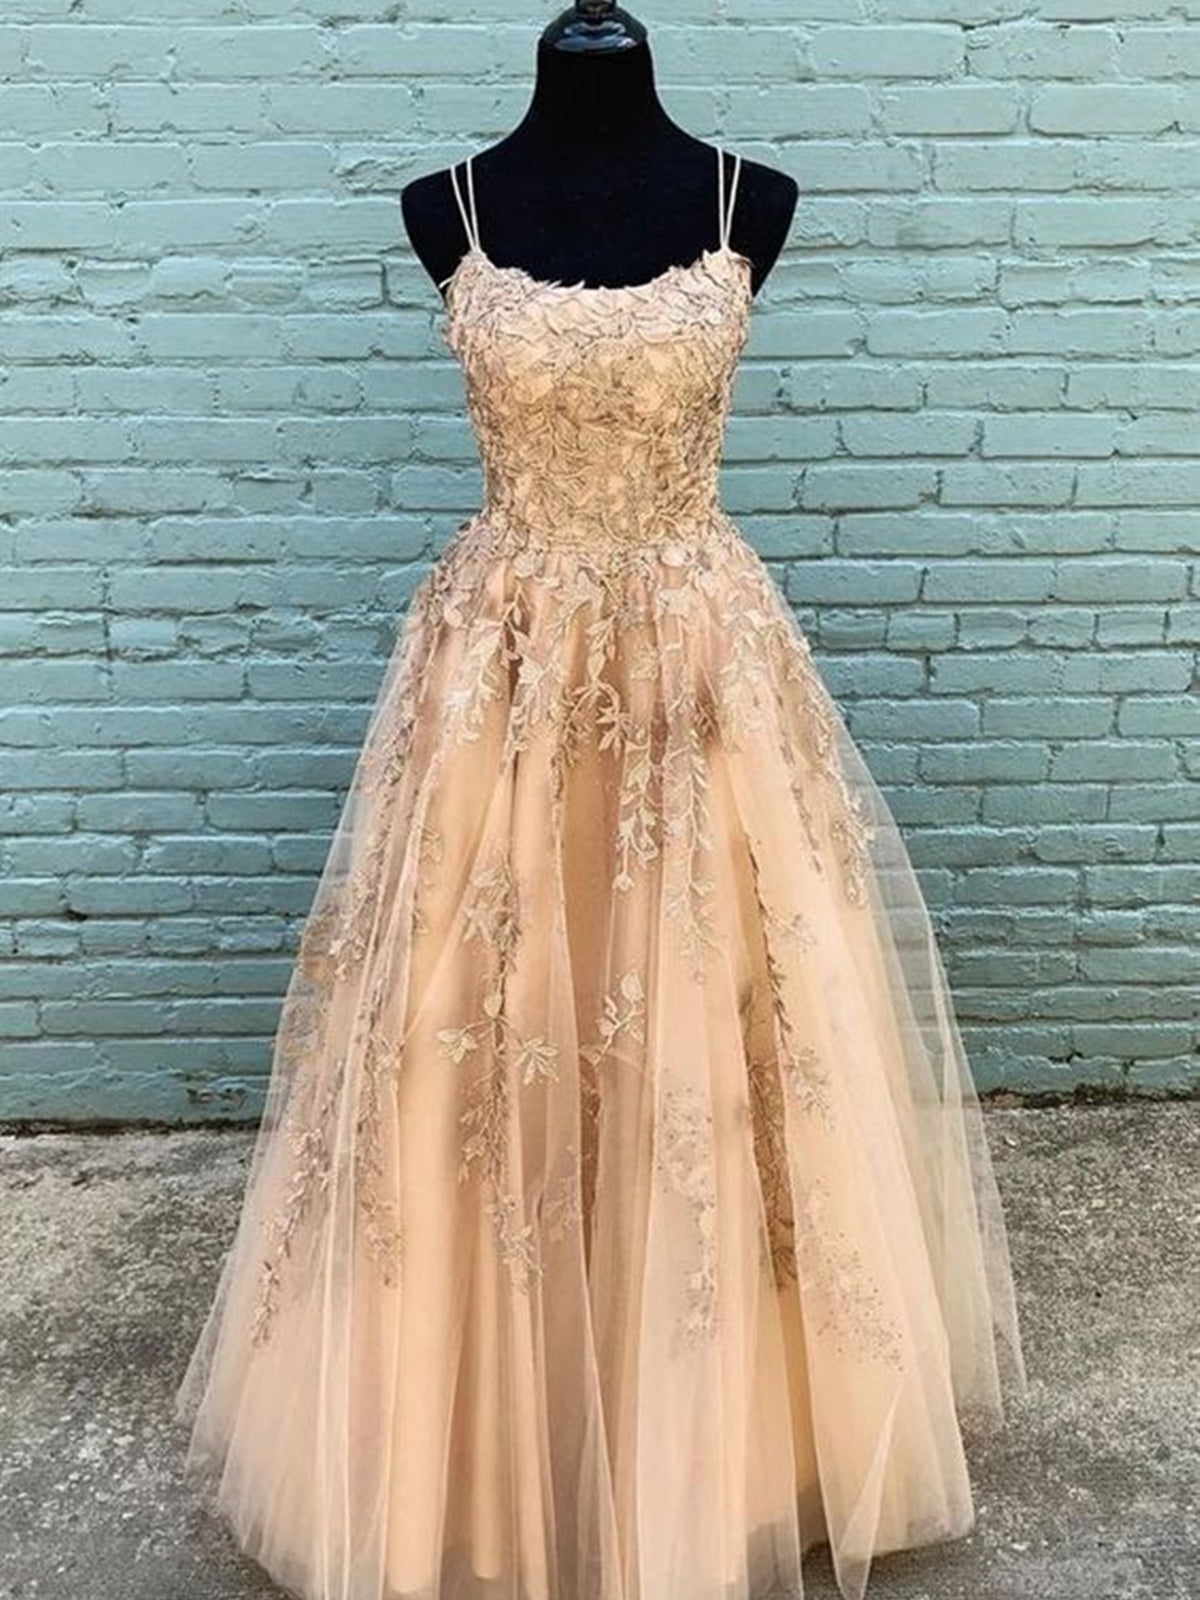 Party Dress Halter Neck, Long Champagne Lace Prom Dresses, Champagne Lace Formal Graduation Dresses